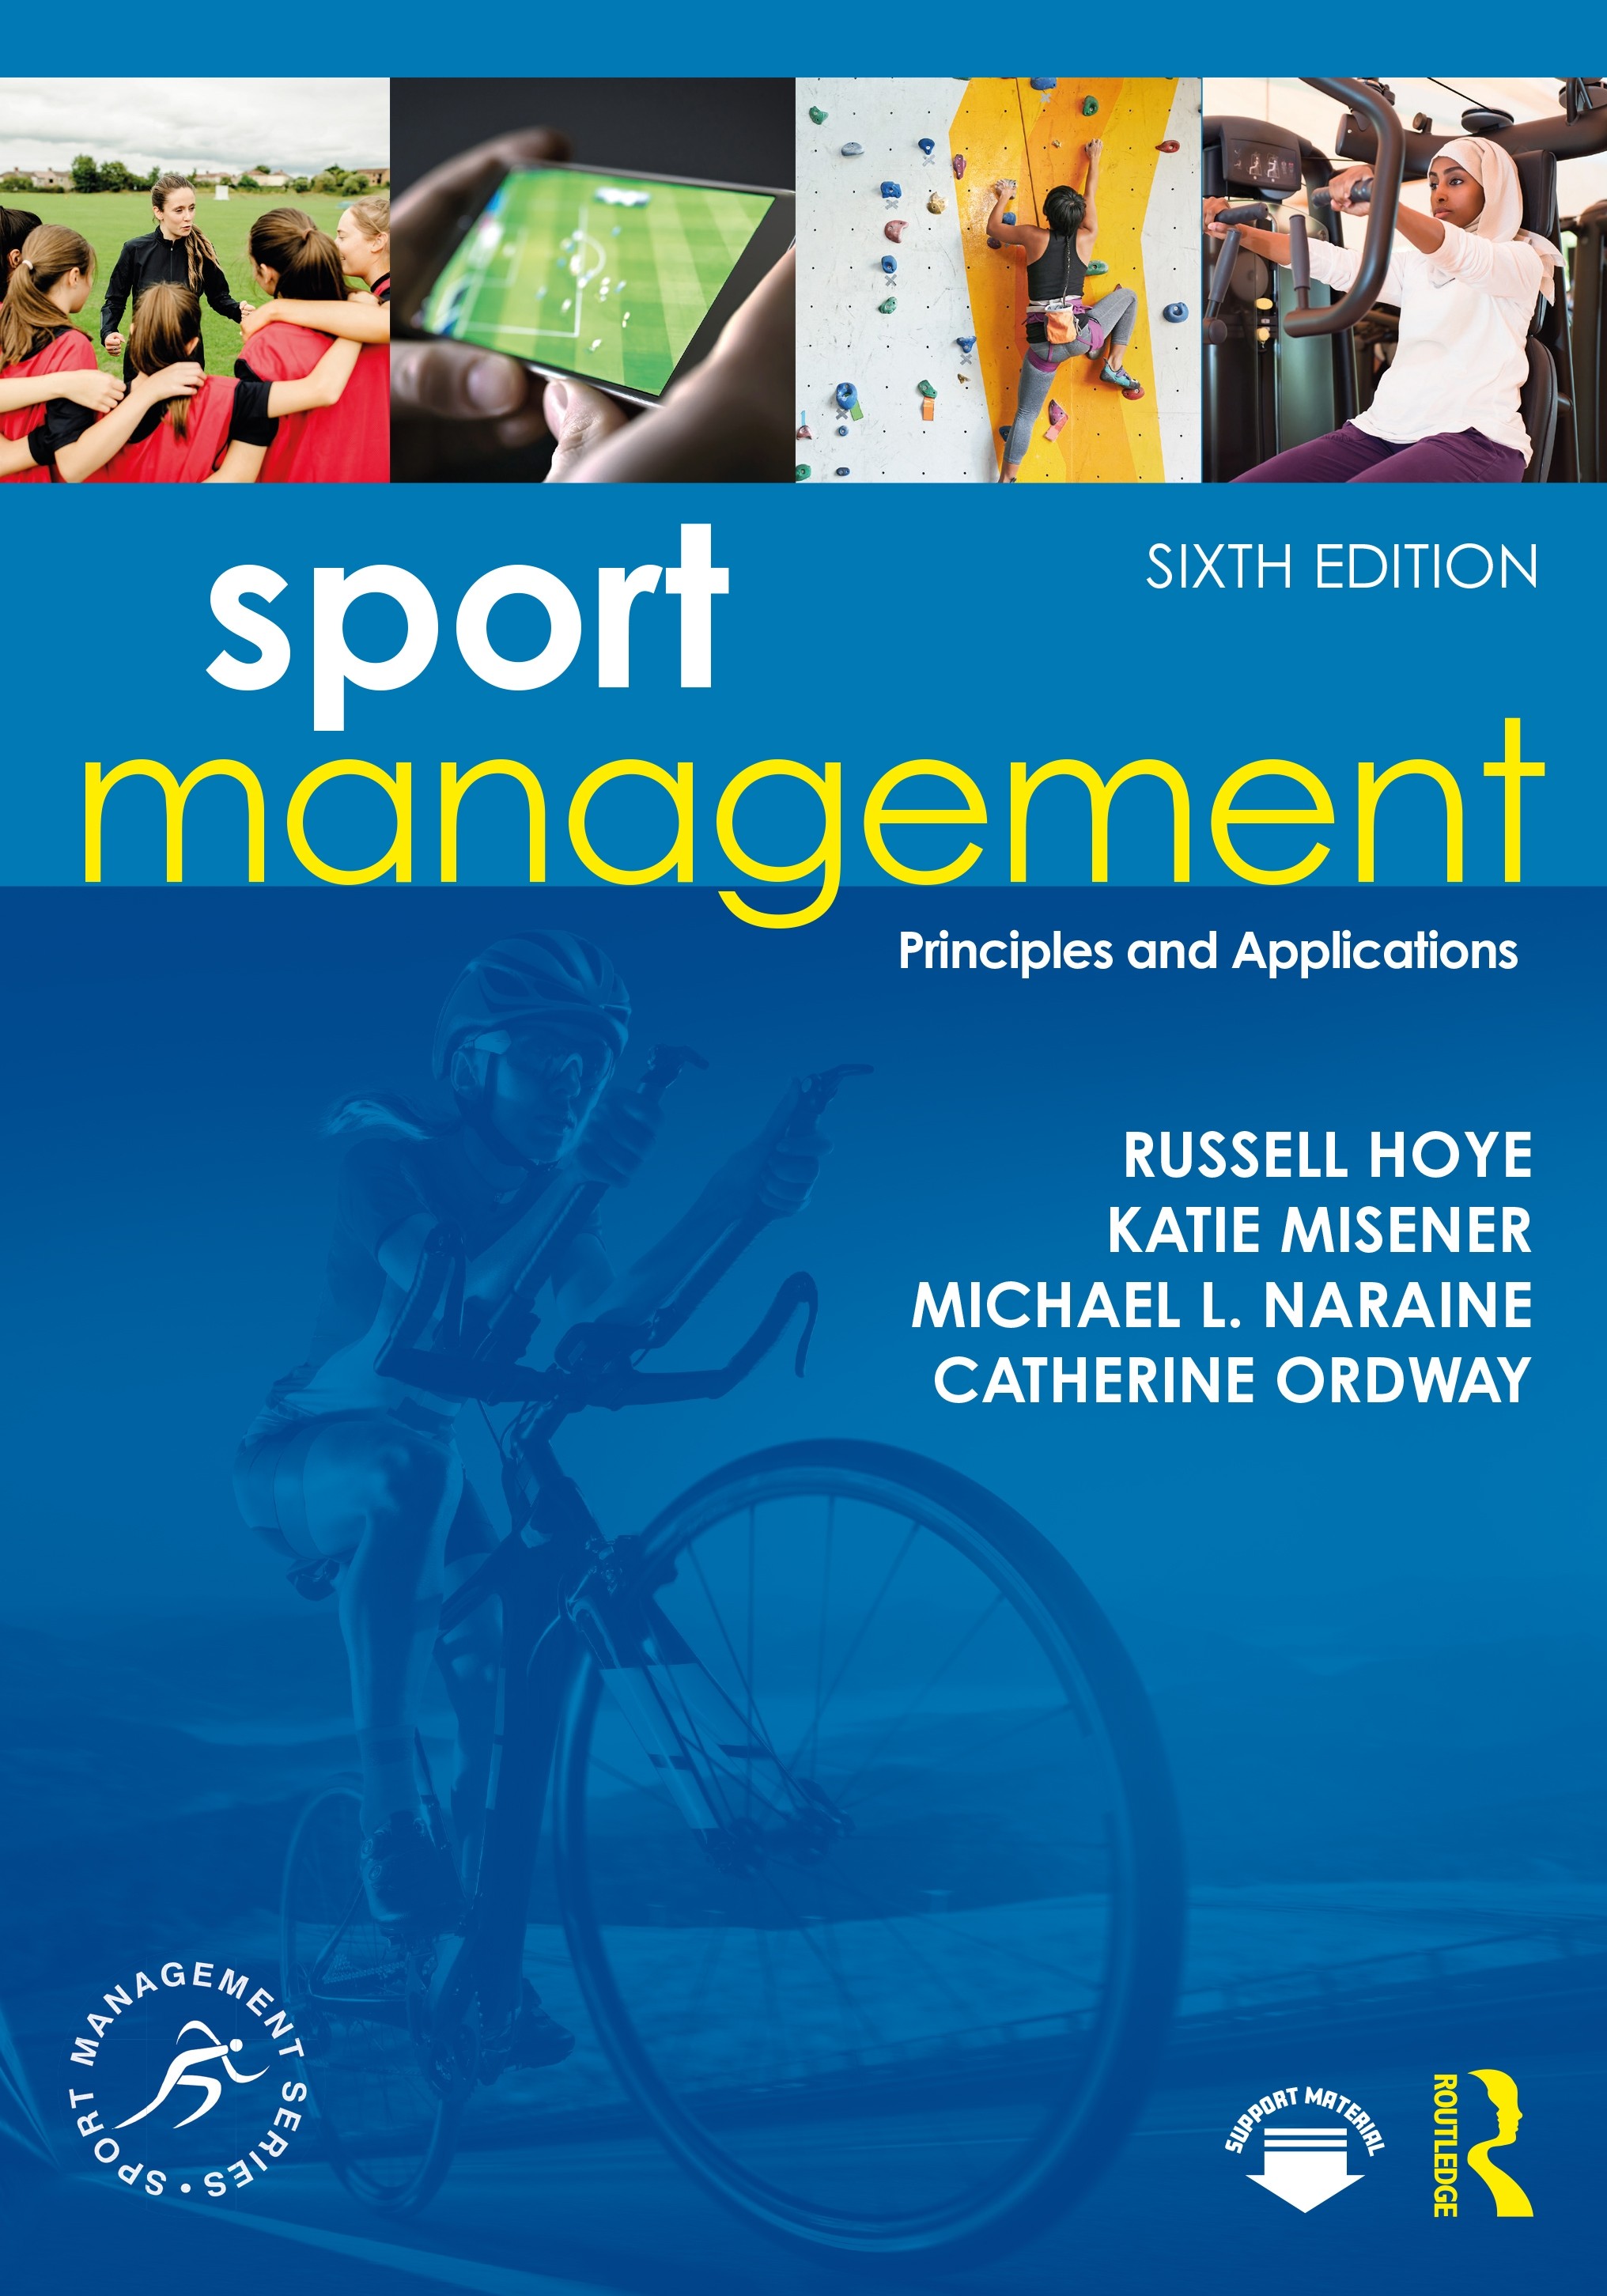 sports management research papers